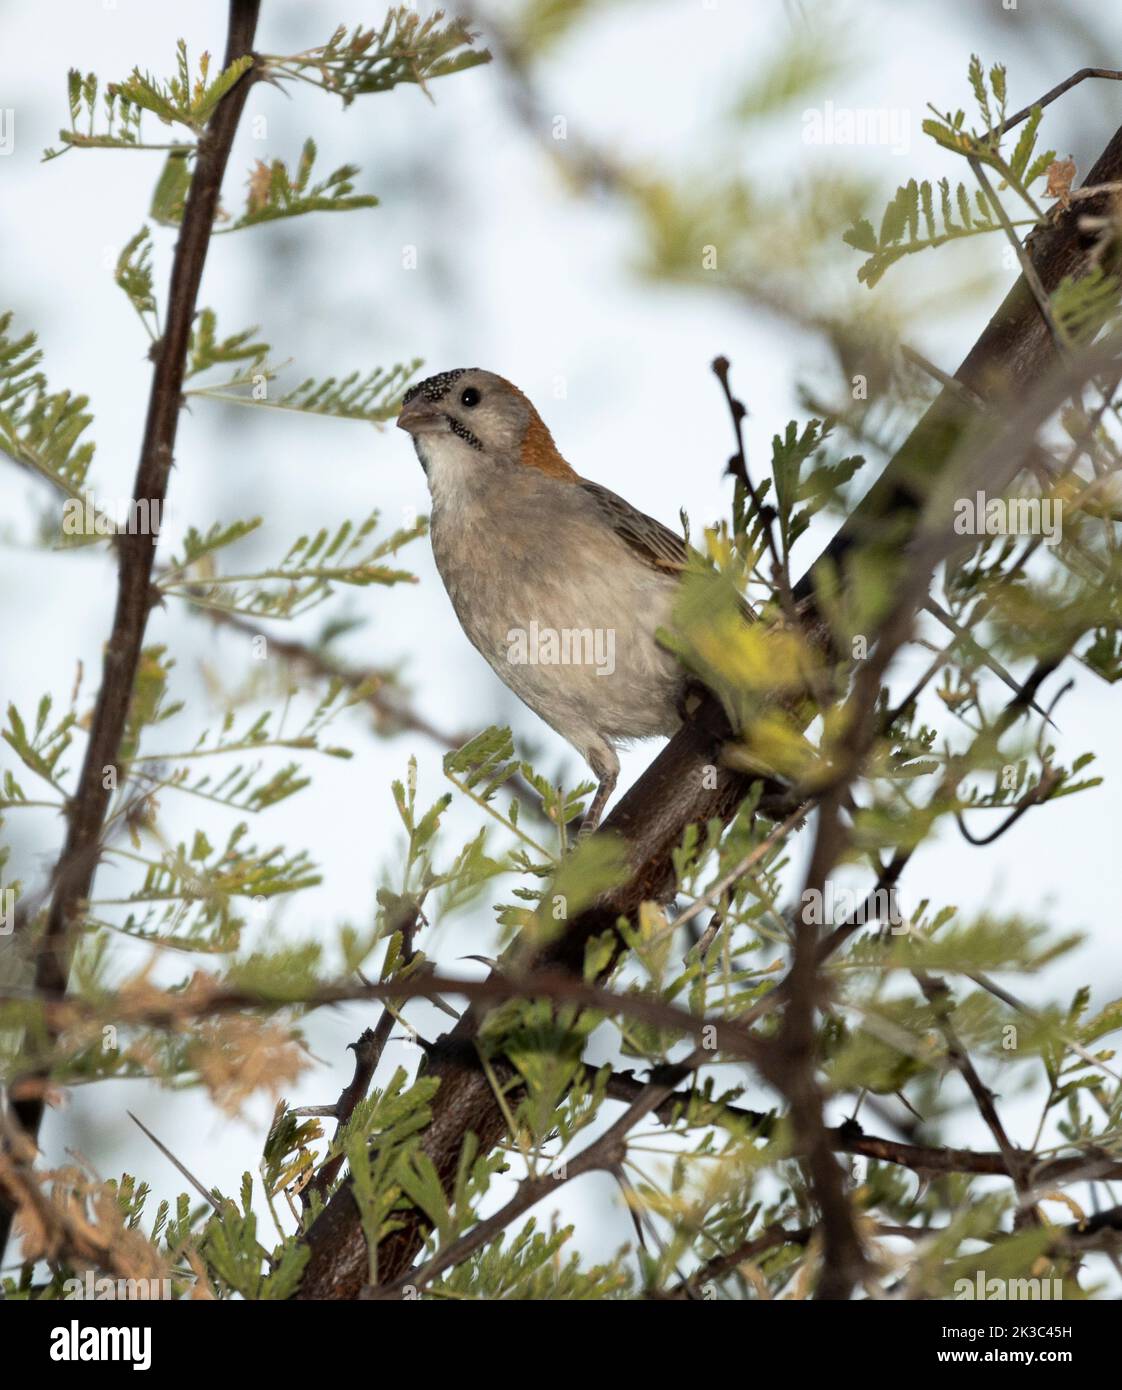 A small, sparrow-like member of the weaver family, the Speckle-fronted weaver prefers semi-arid wooded savanna. The sexes are alike. Stock Photo